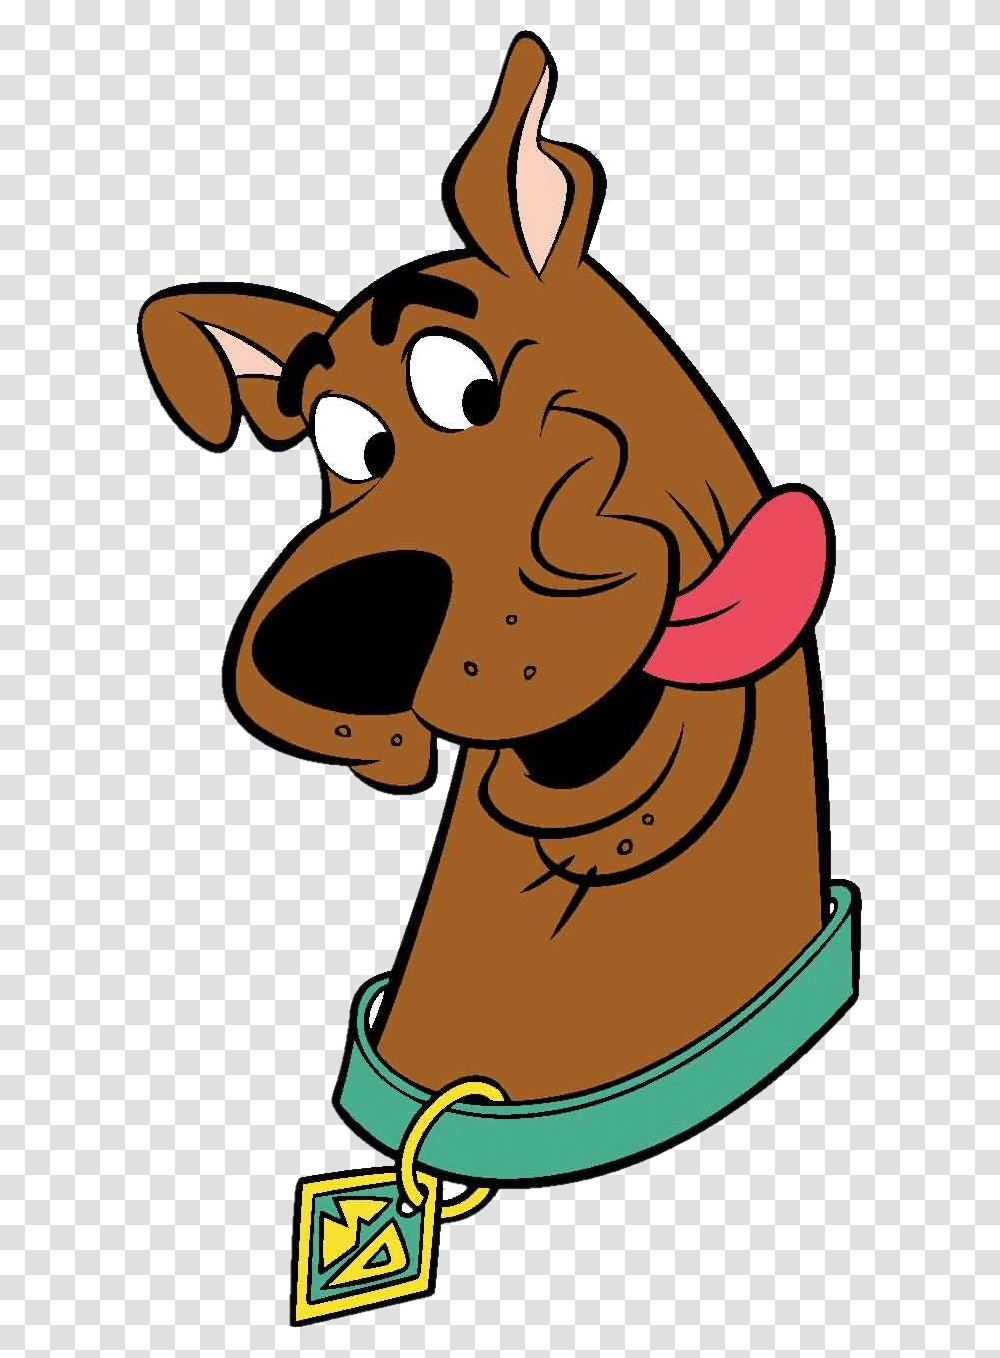 Scooby Doo Clipart Free Best On Cartoon Characters Scooby Doo, Animal, Mammal Transparent Png